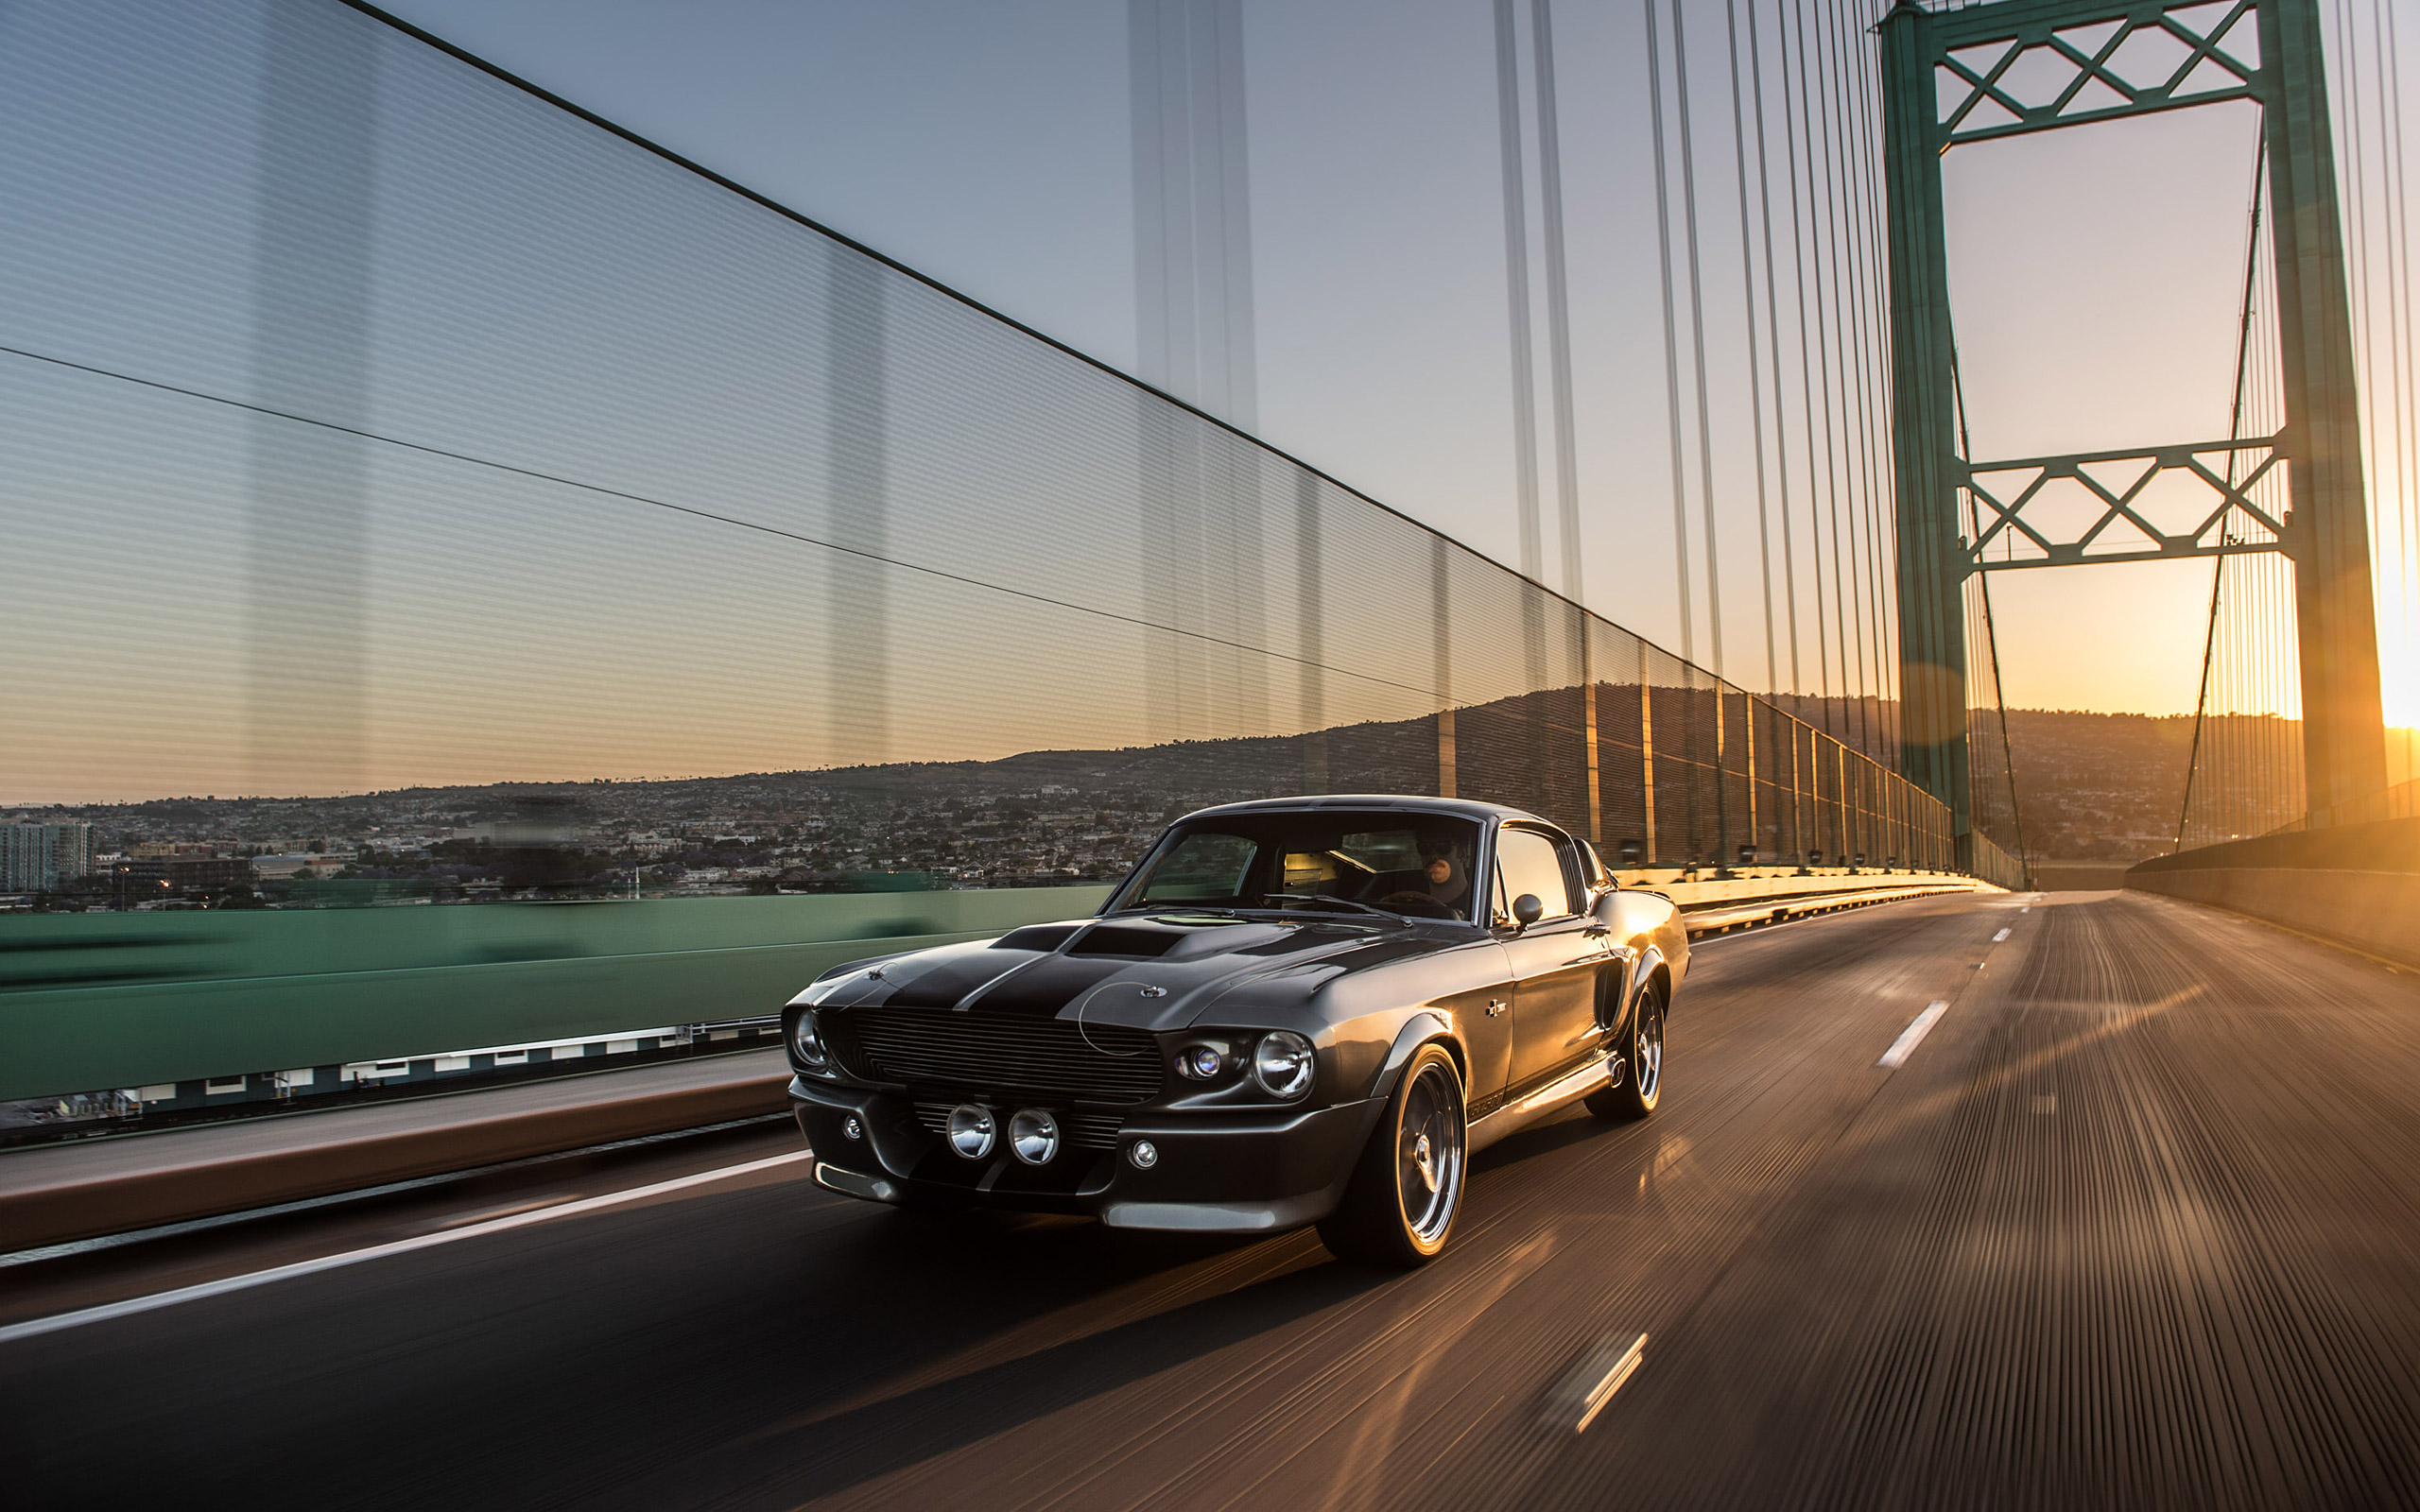 Mustang Of The Day: 2000 Ford Mustang GT500 Eleanor